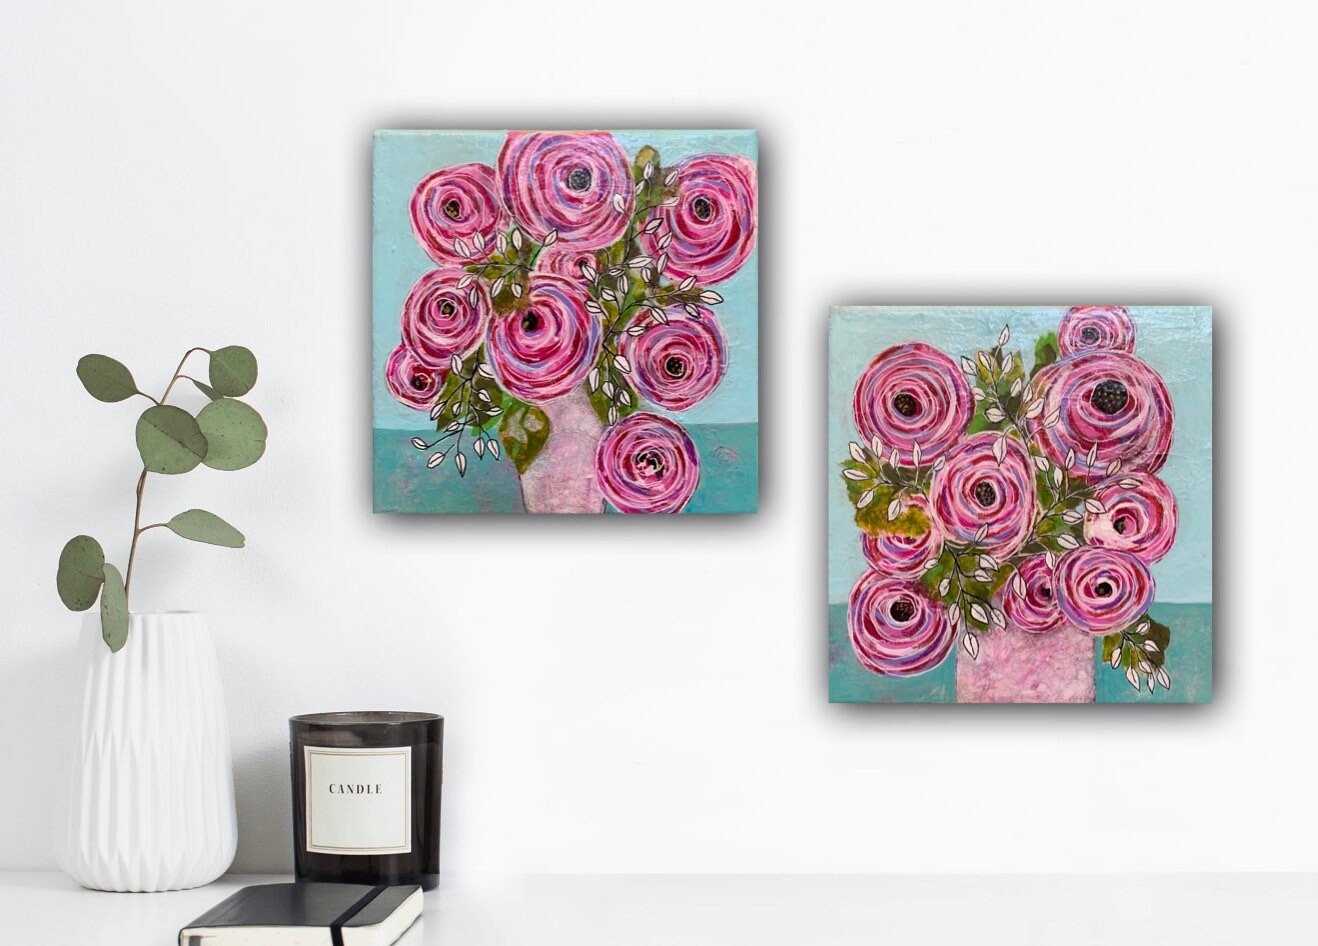 Whirling Blooms Roses painting Set of 2 in Rainbow colors Whimsical expressionist painting One of a kind nature wall art Garden